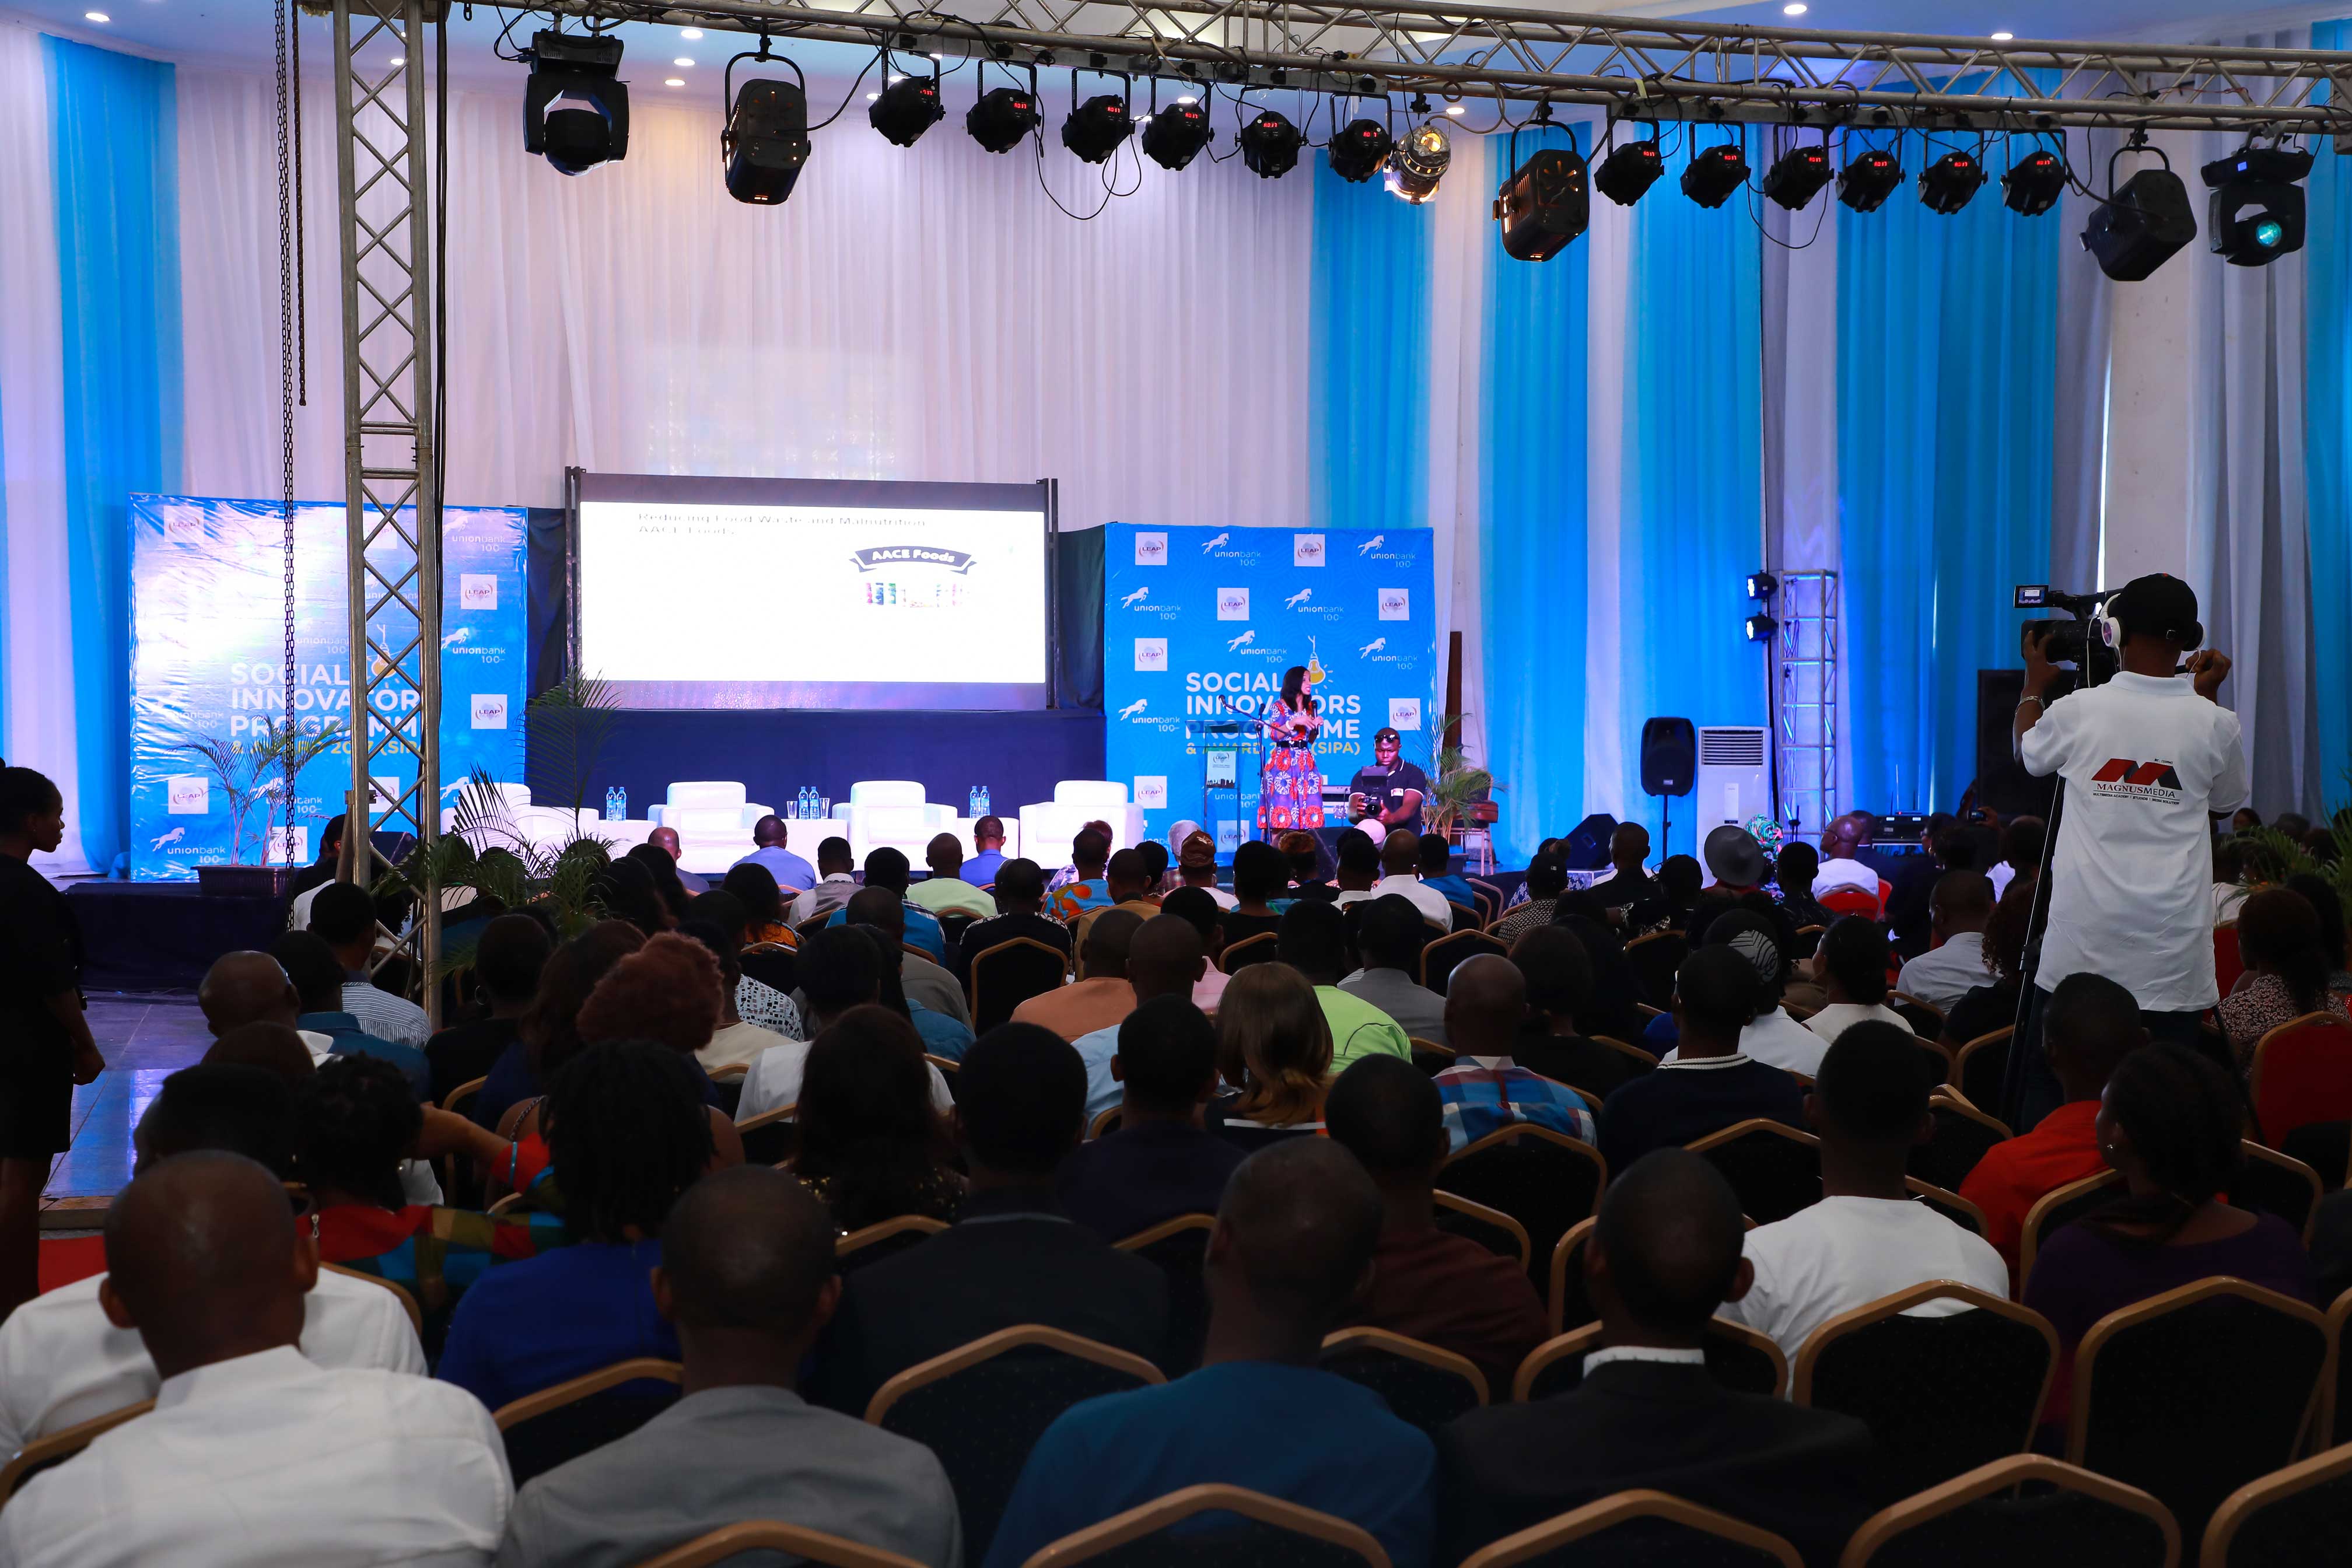 LEAP AFRICA live streaming coverage by Magnus Media